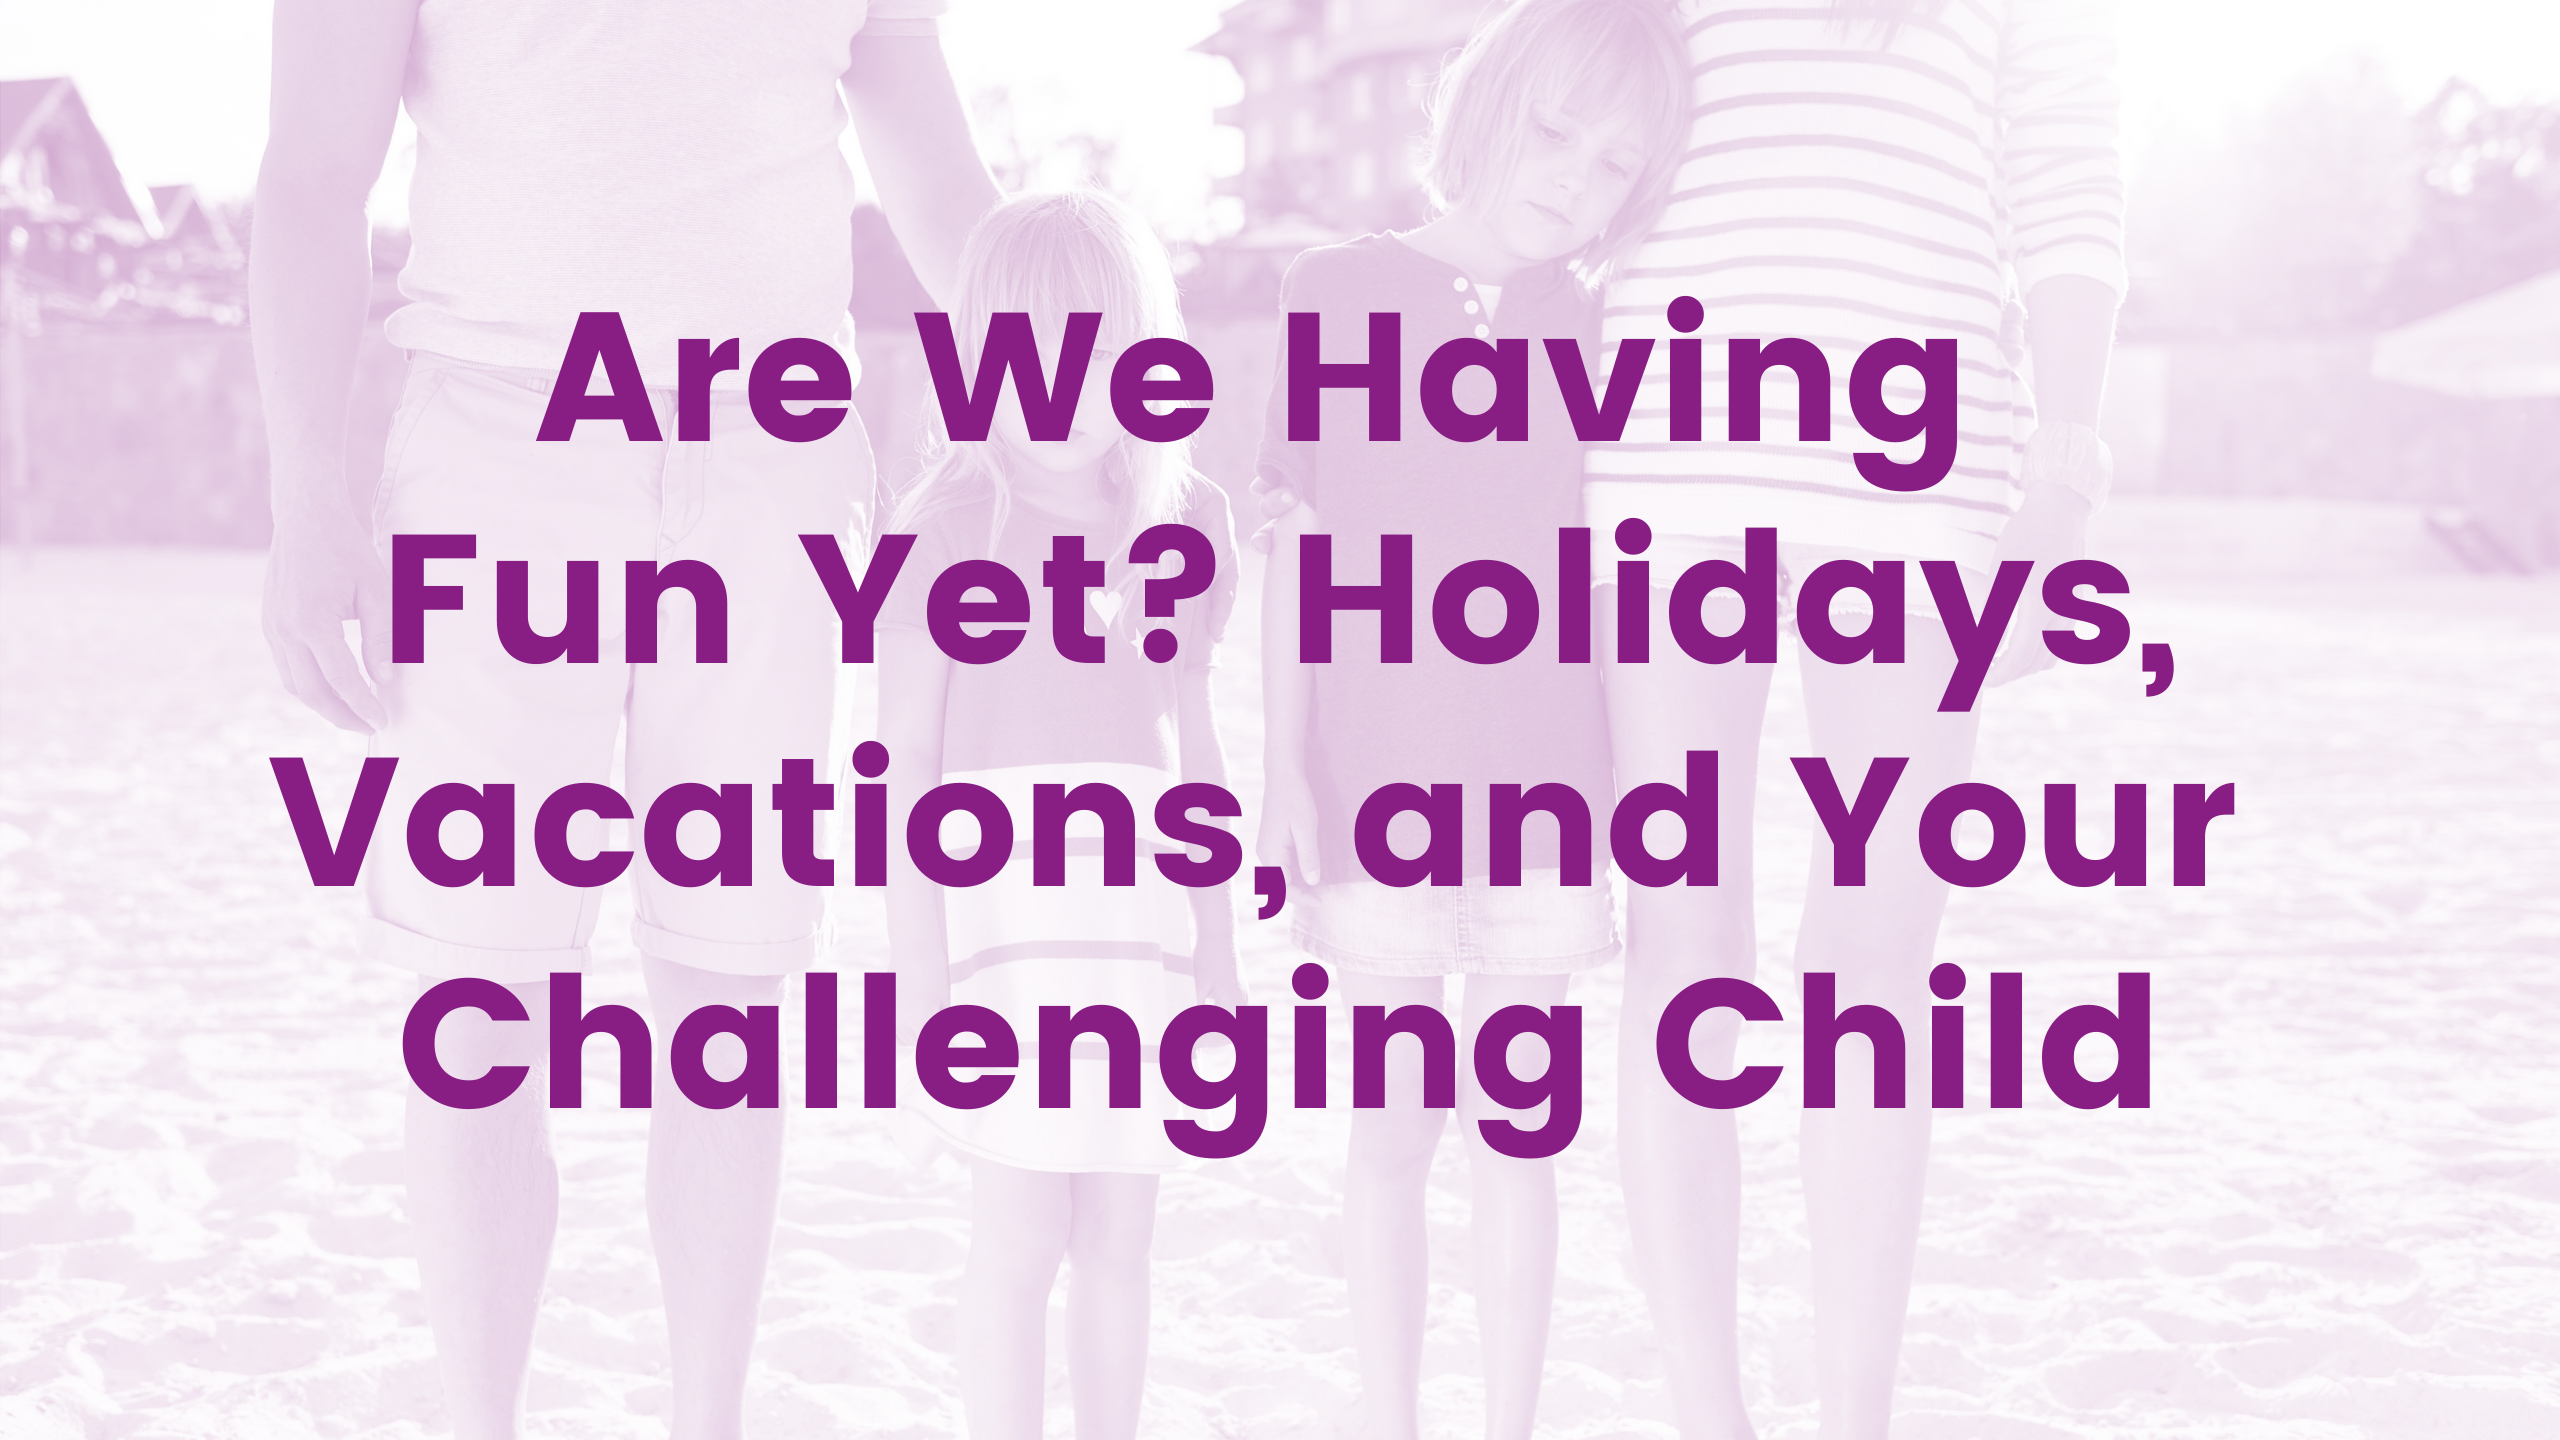 Are We Having Fun Yet? Holidays, Vacations and Your Challenging Child Webinar